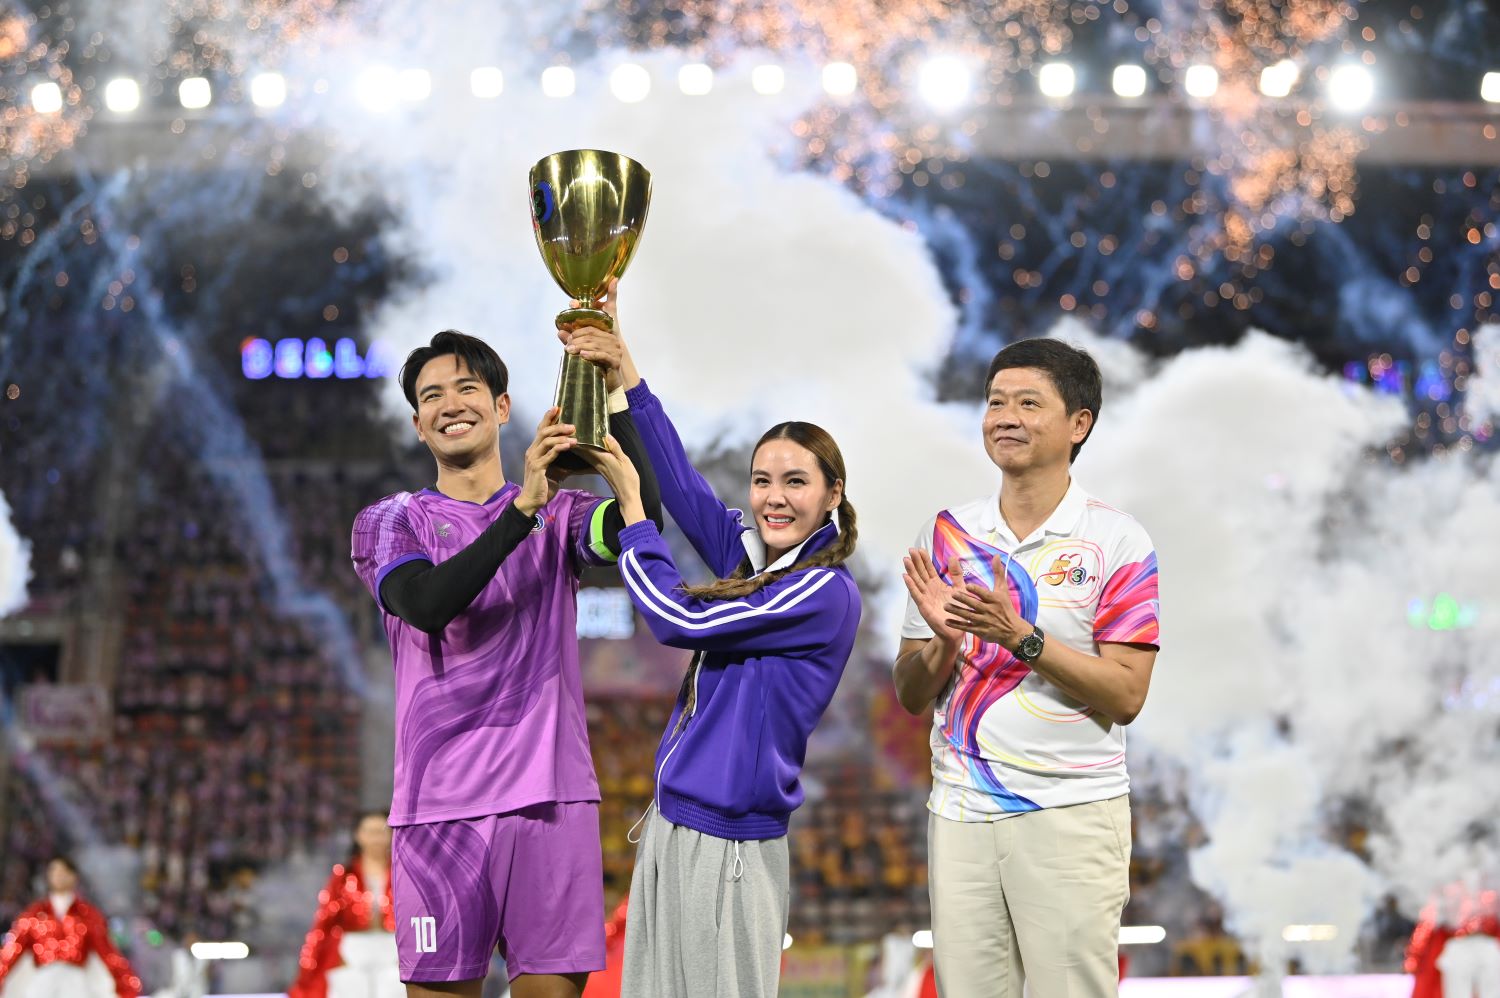 The Great “Beloved Festival 53rd years: Good for Hearts” Channel 3 Superstars’ Football Match. Purple 12 – 8 Yellow Goals